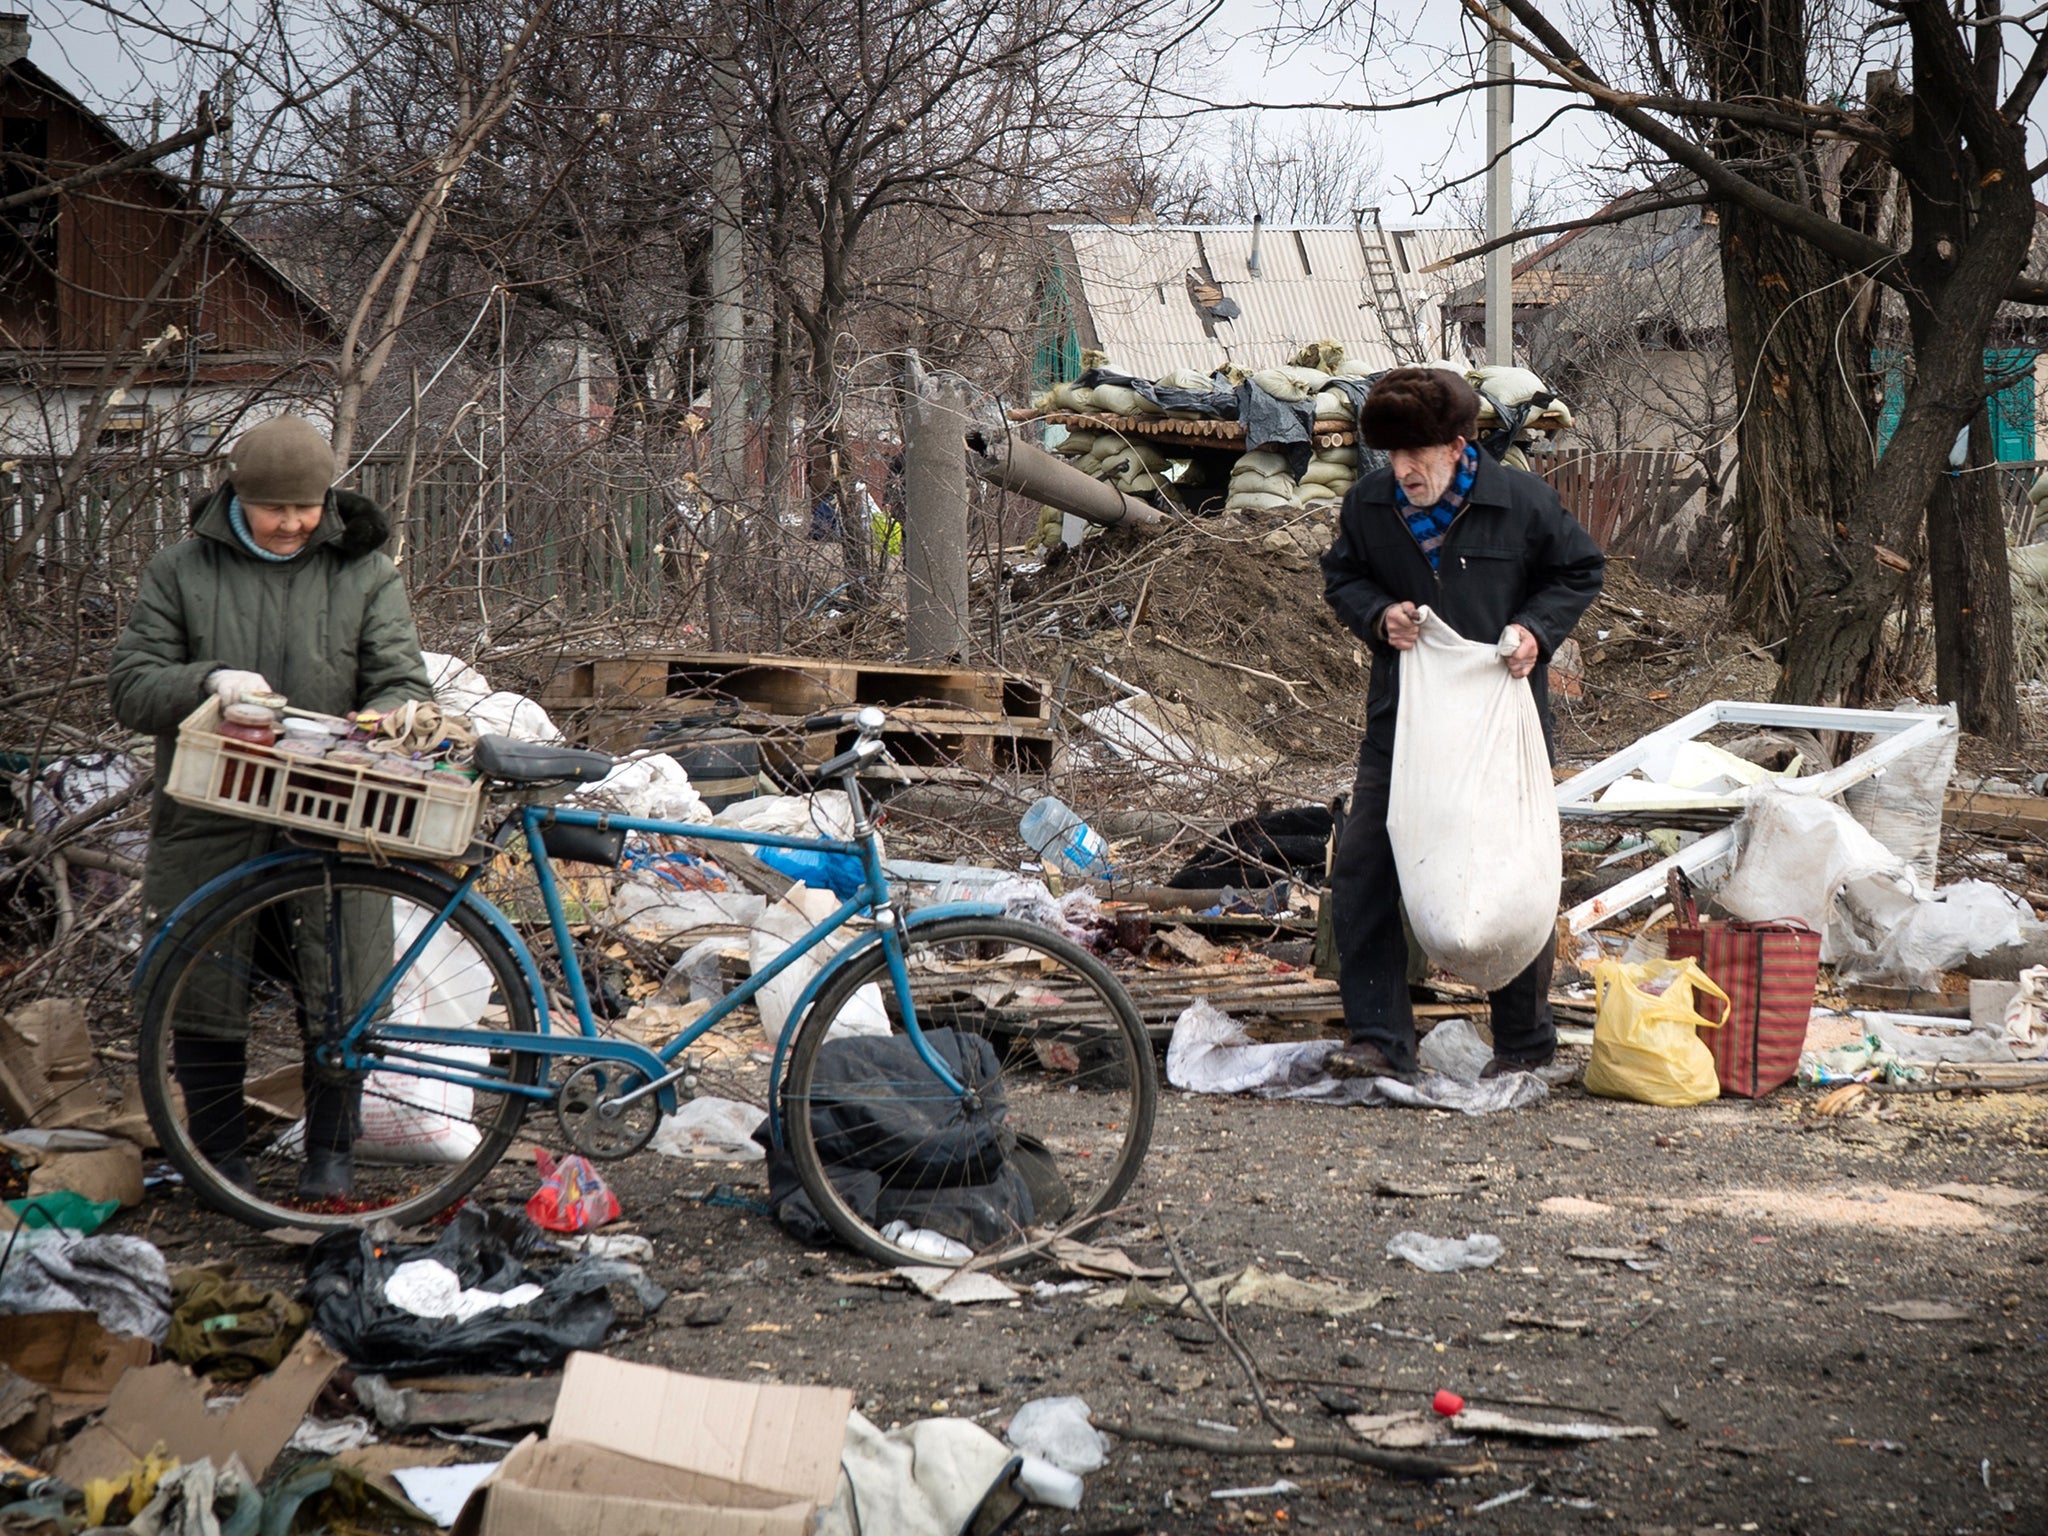 Residents collect their belongings after a cleaning operation by pro-Russians rebels in Debaltseve.